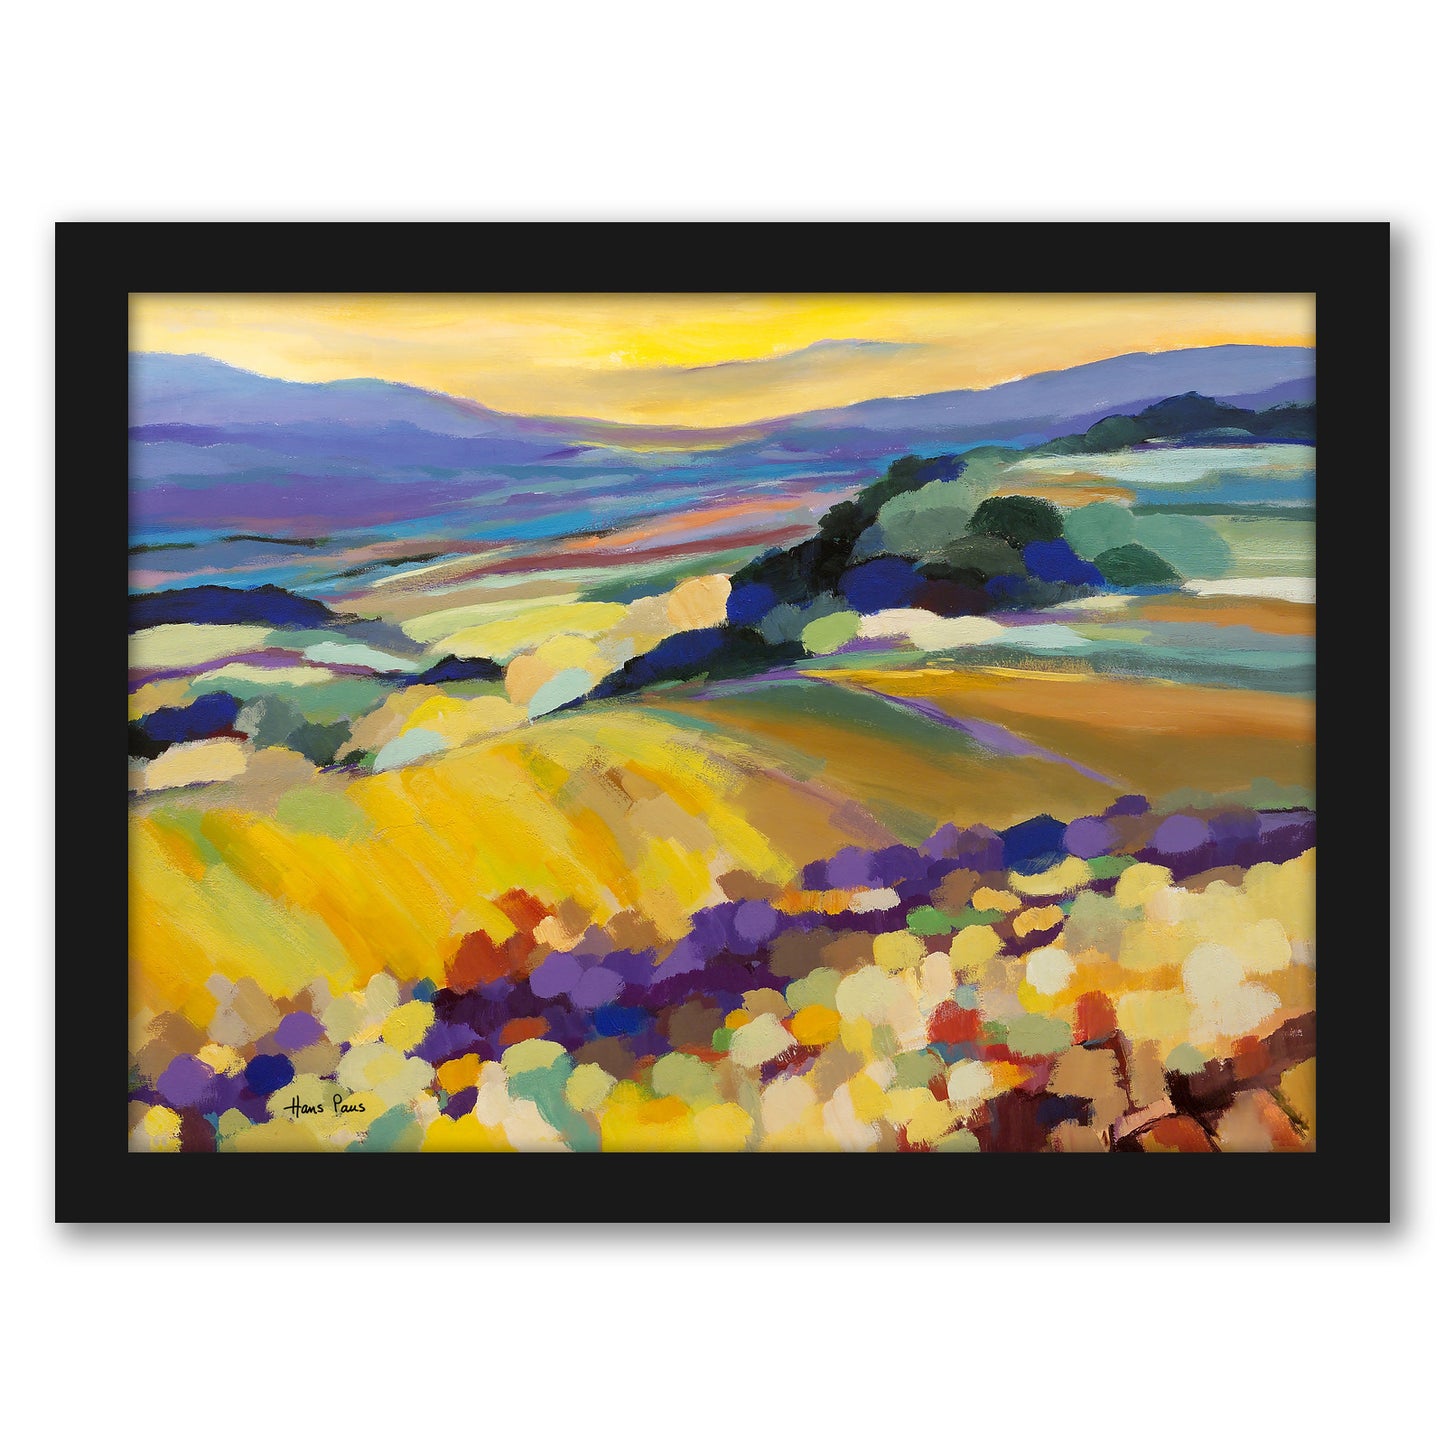 Abstract Landscape 8 By Hans Paus - Framed Print